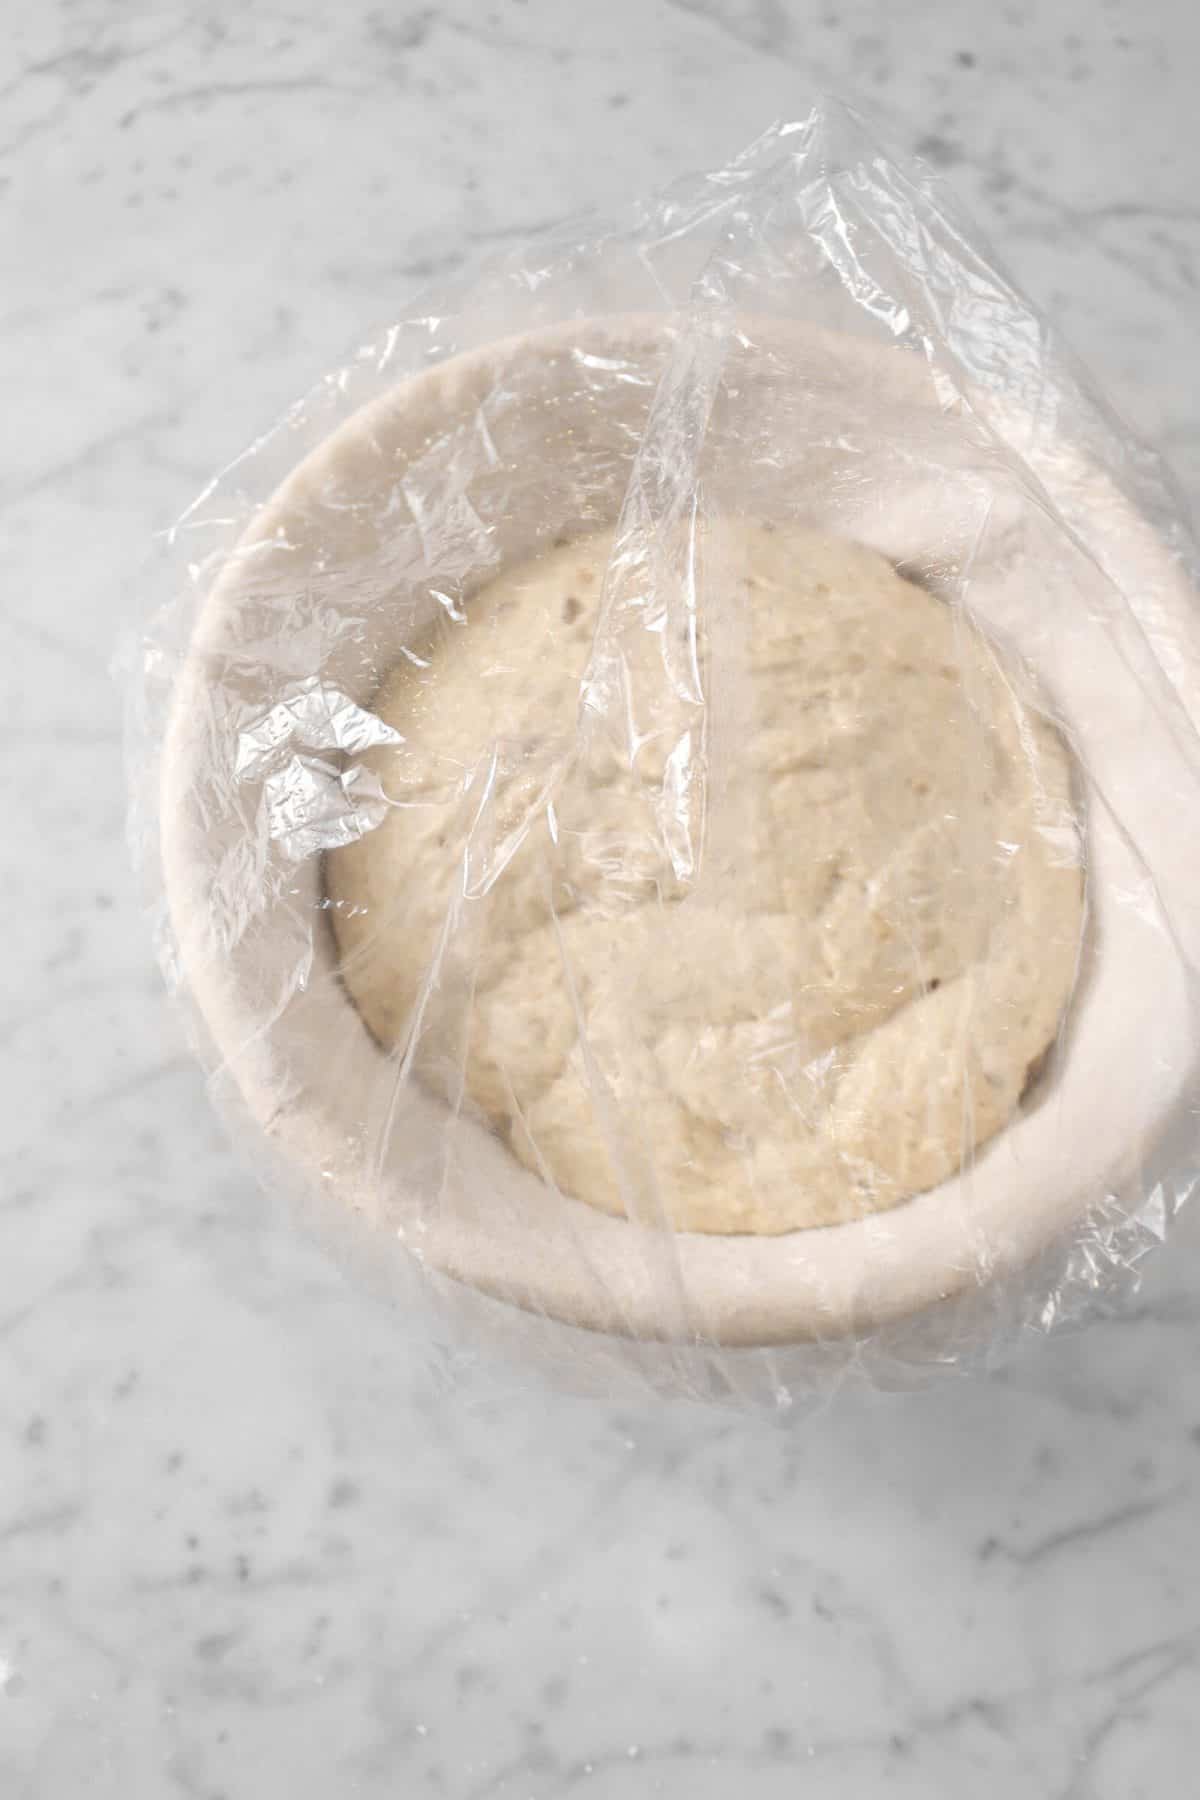 dough in a banneton covered with a plastic shower cap